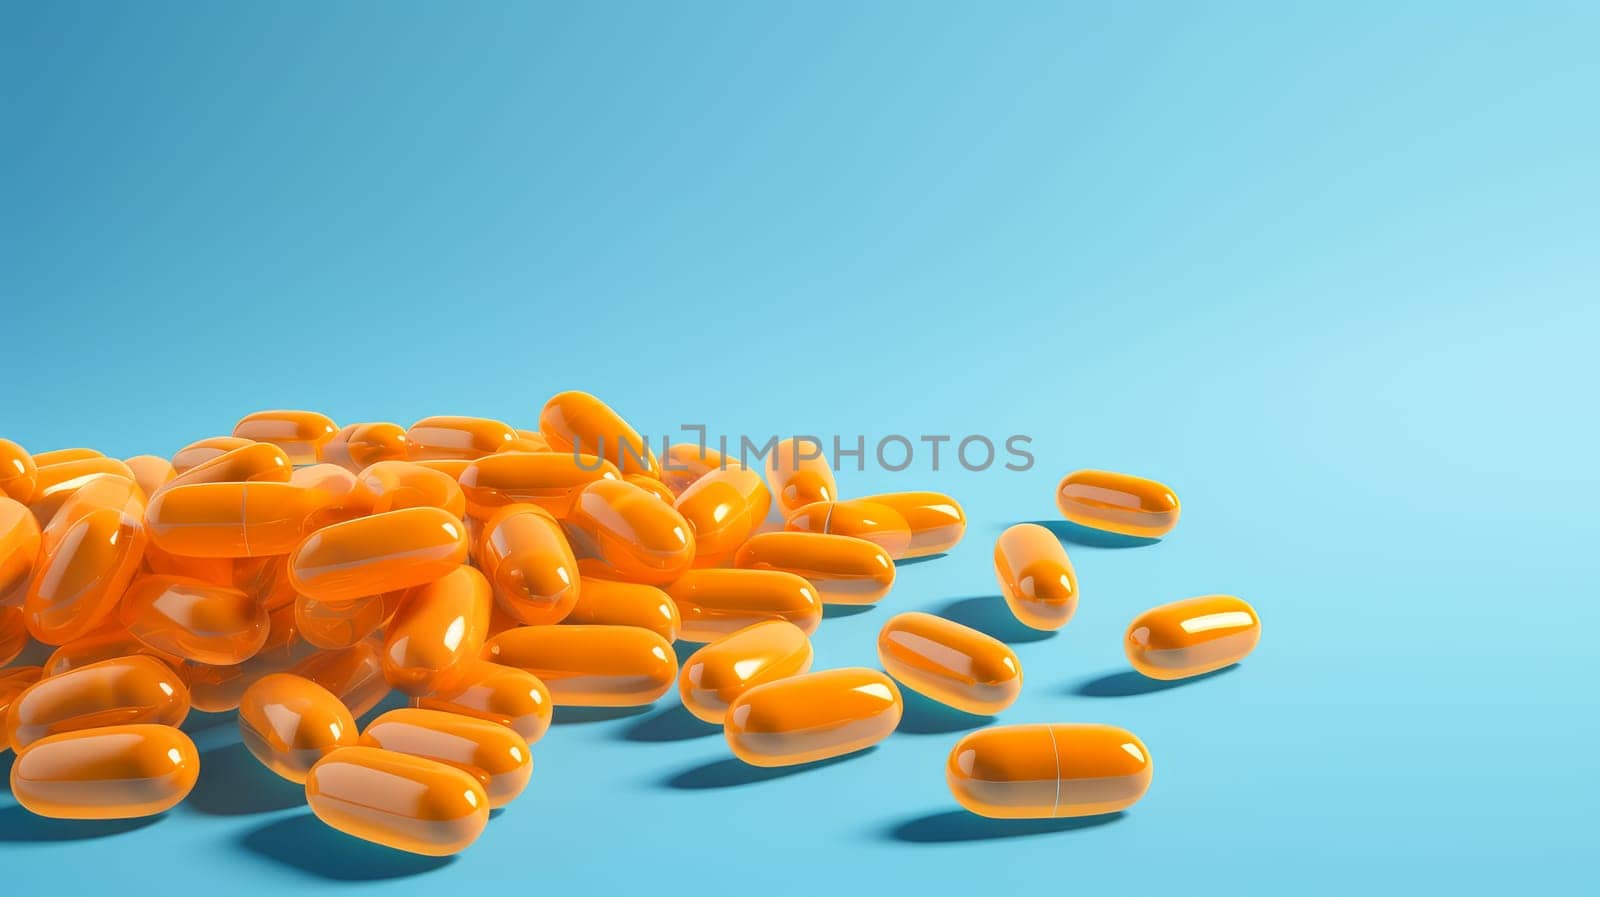 Yellow orange pills, capsules and vitamins in a jar on a blue background. by Alla_Yurtayeva